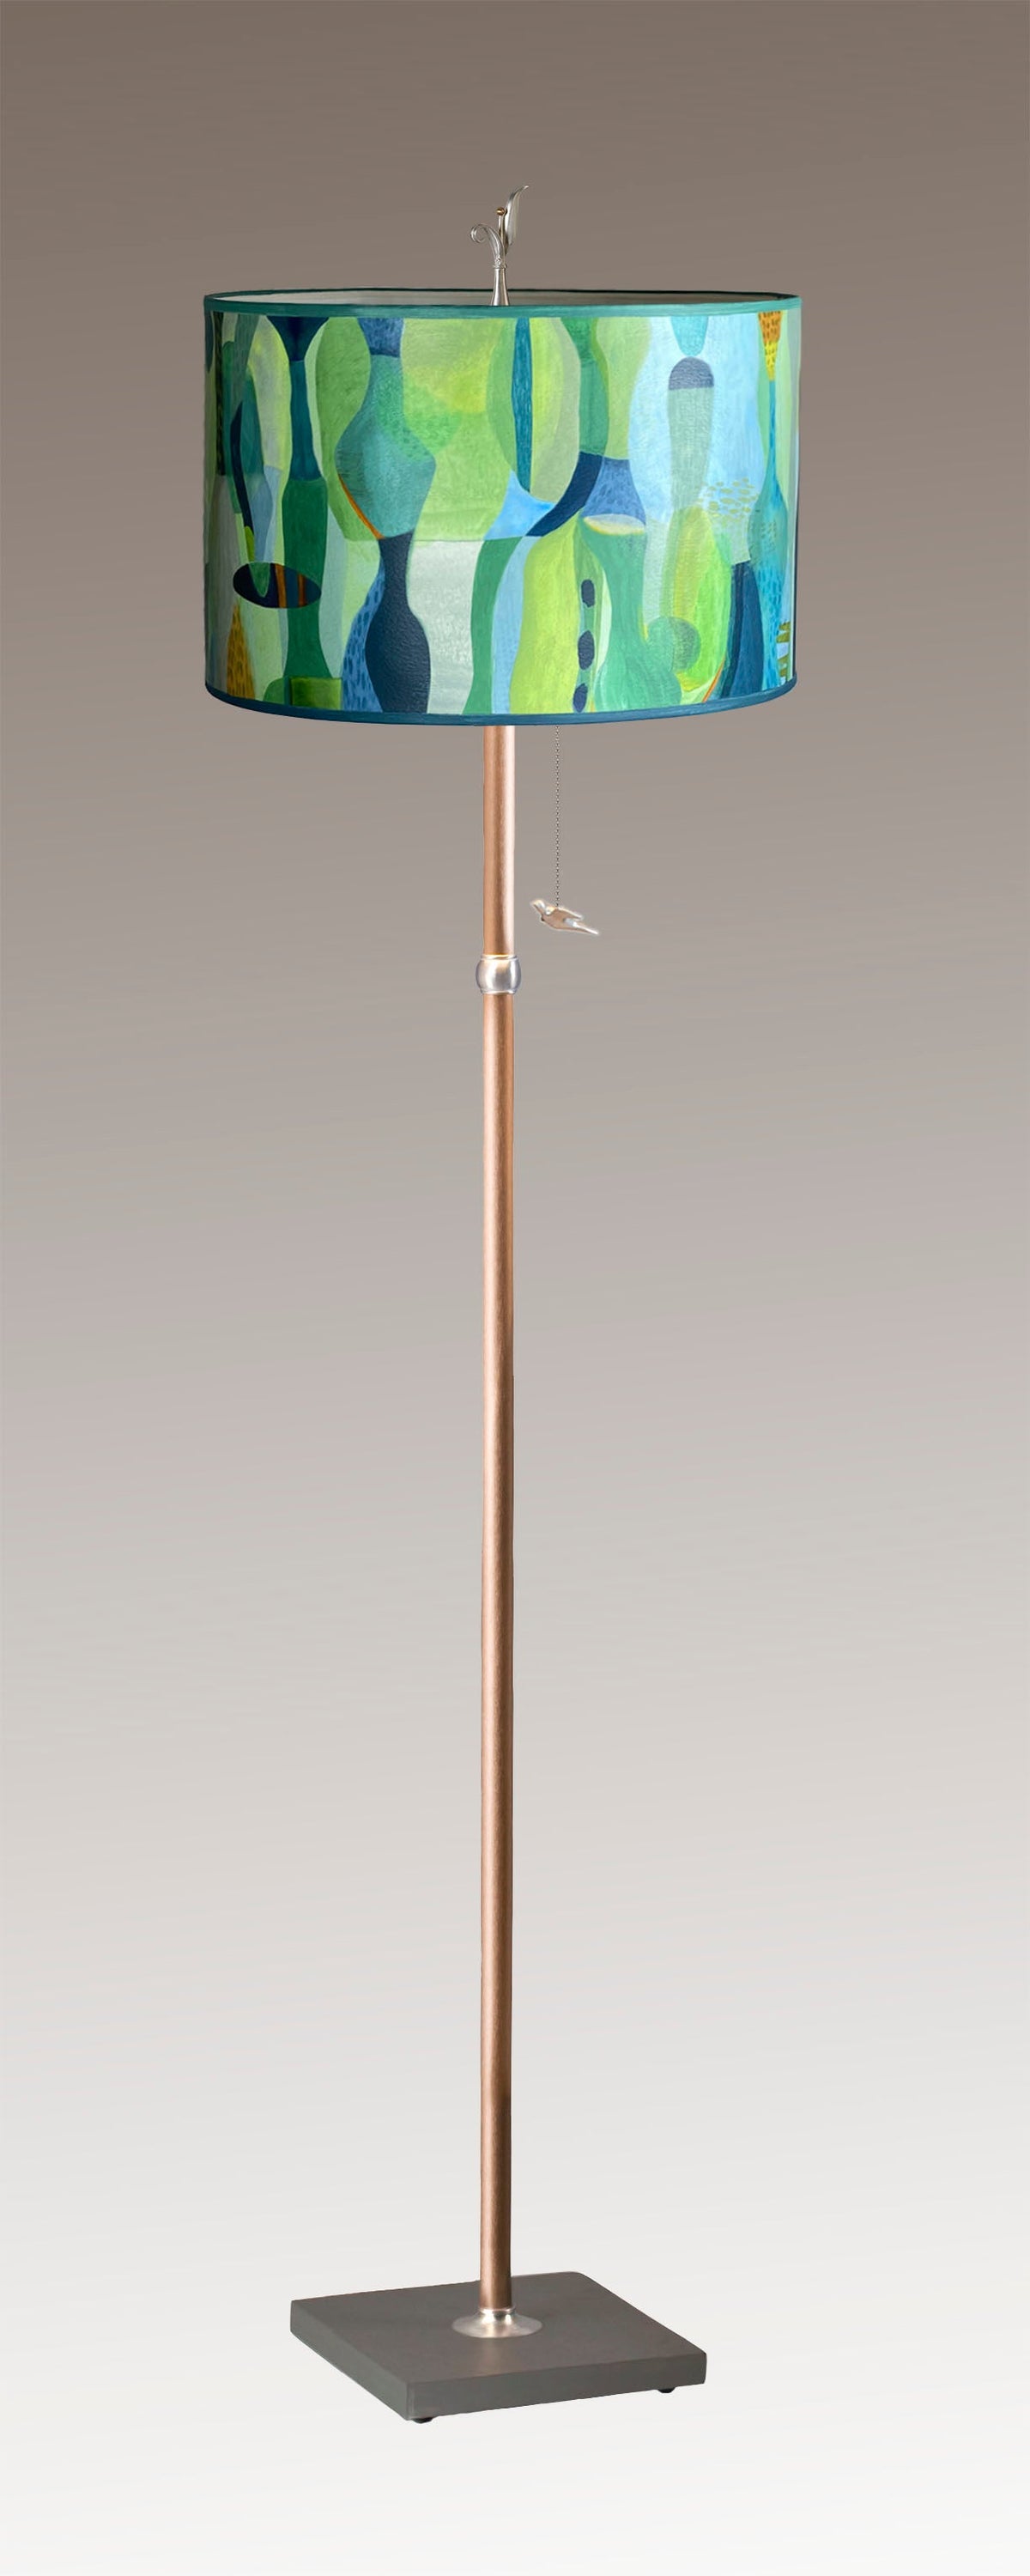 Copper Floor Lamp with Large Drum Shade in Riviera in Citrus